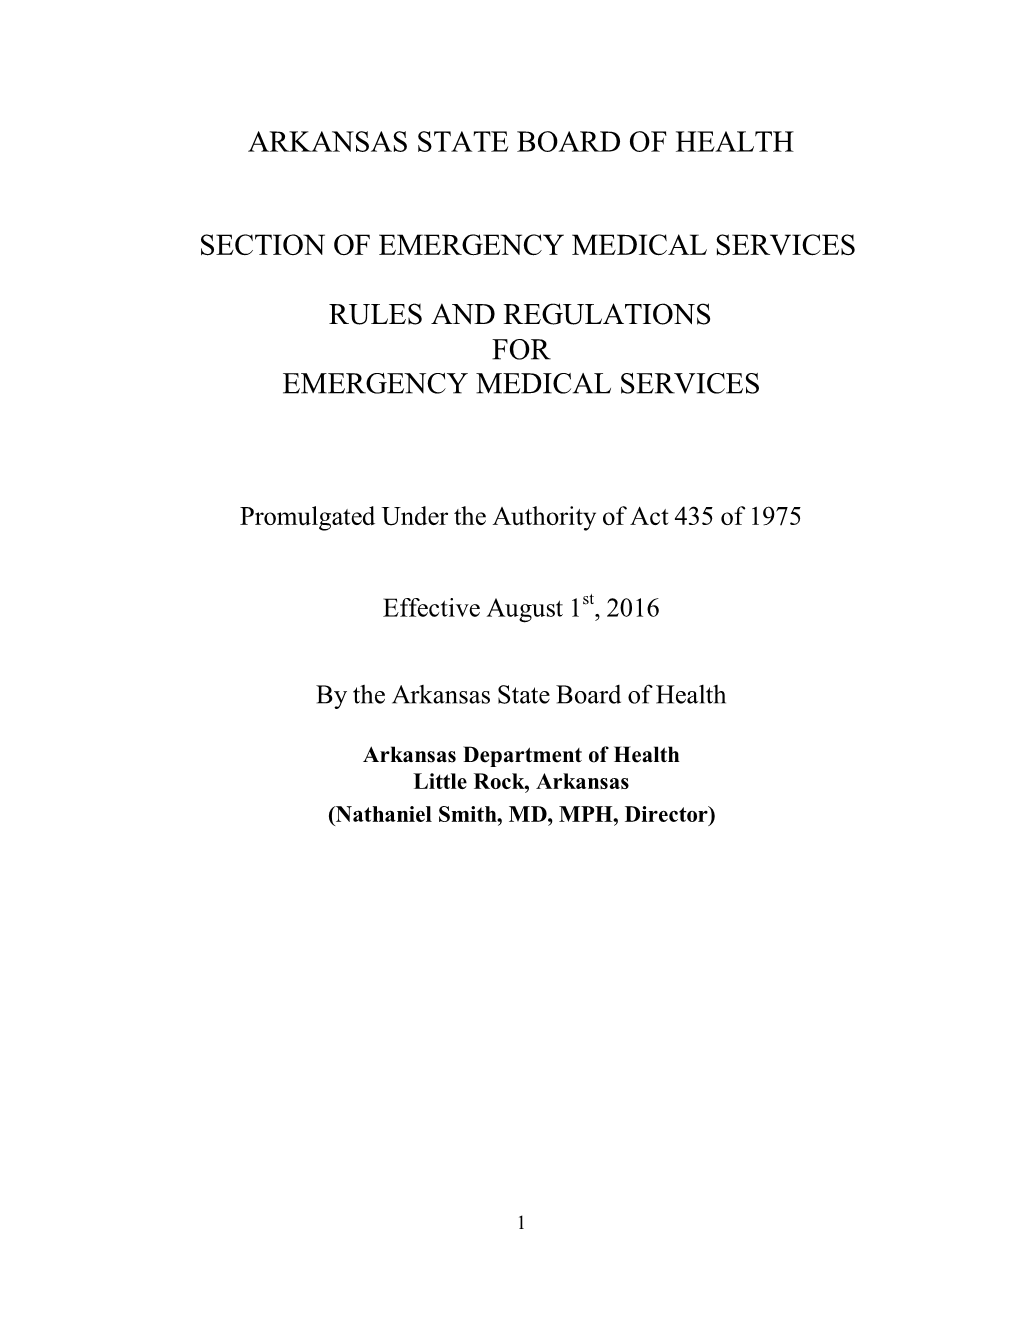 Arkansas State Board of Health Section of Emergency Medical Services